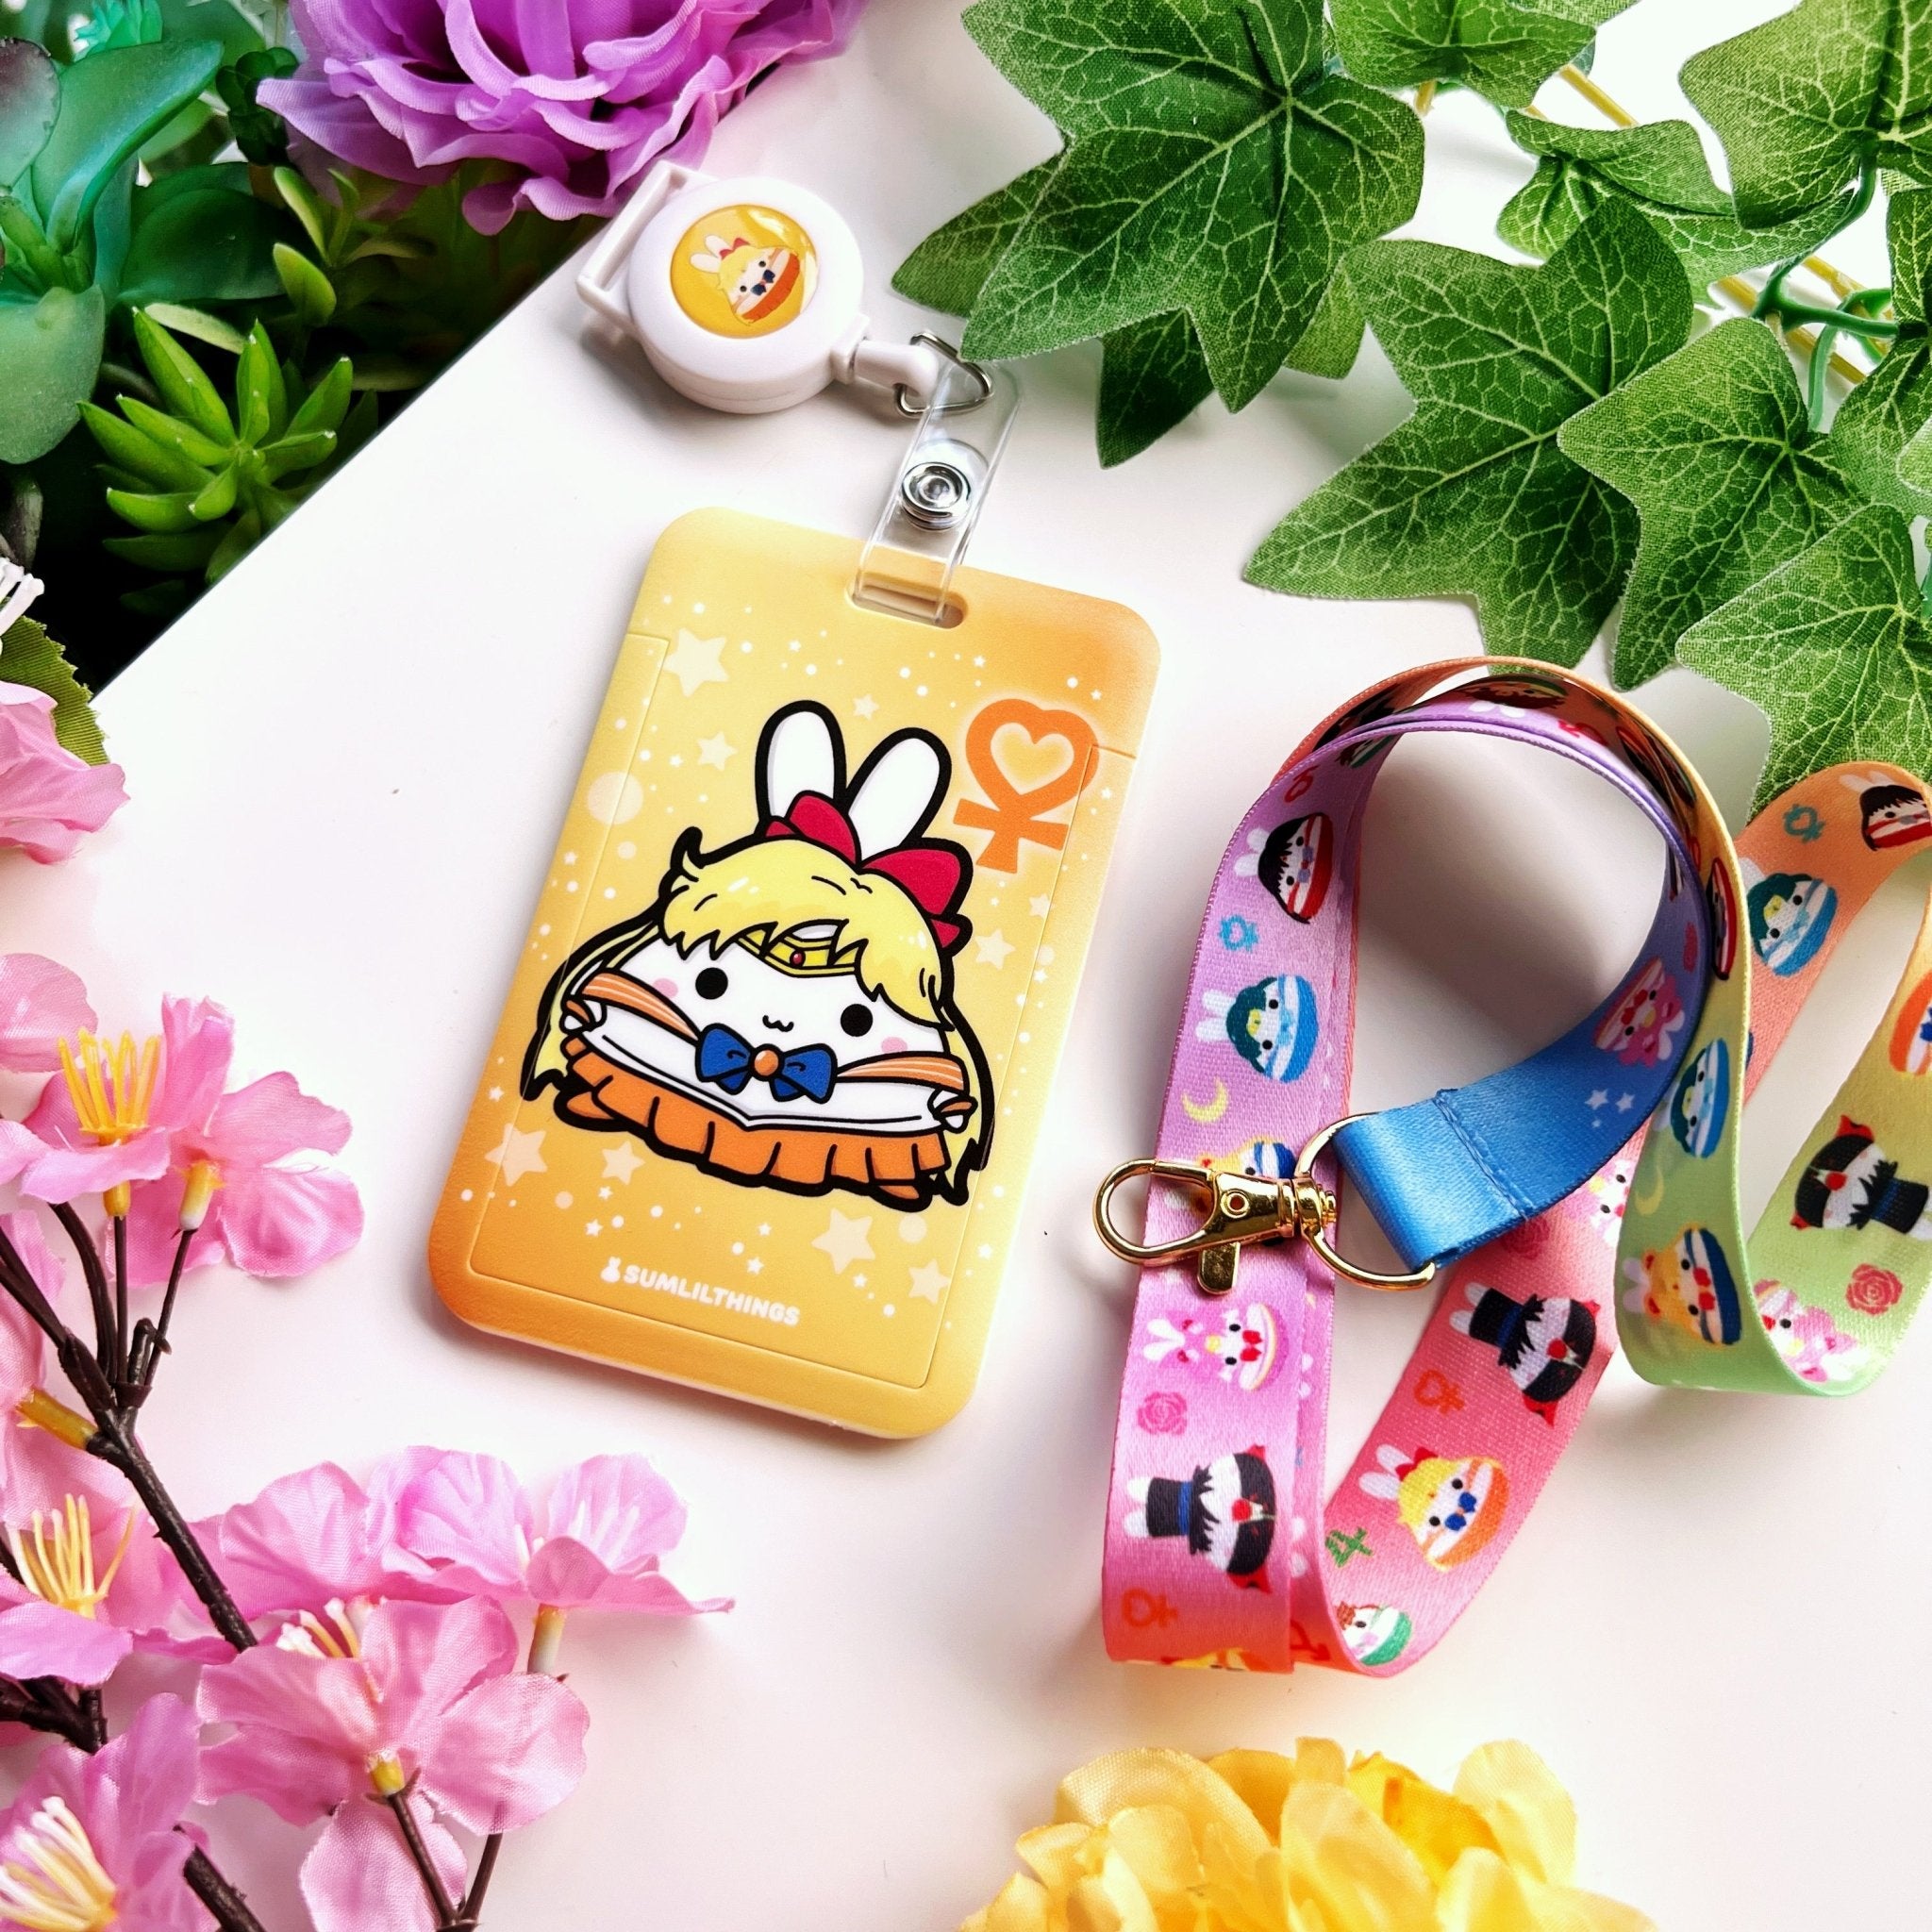 ID Card Holder - Lil' Moon Power Collection - SumLilThings